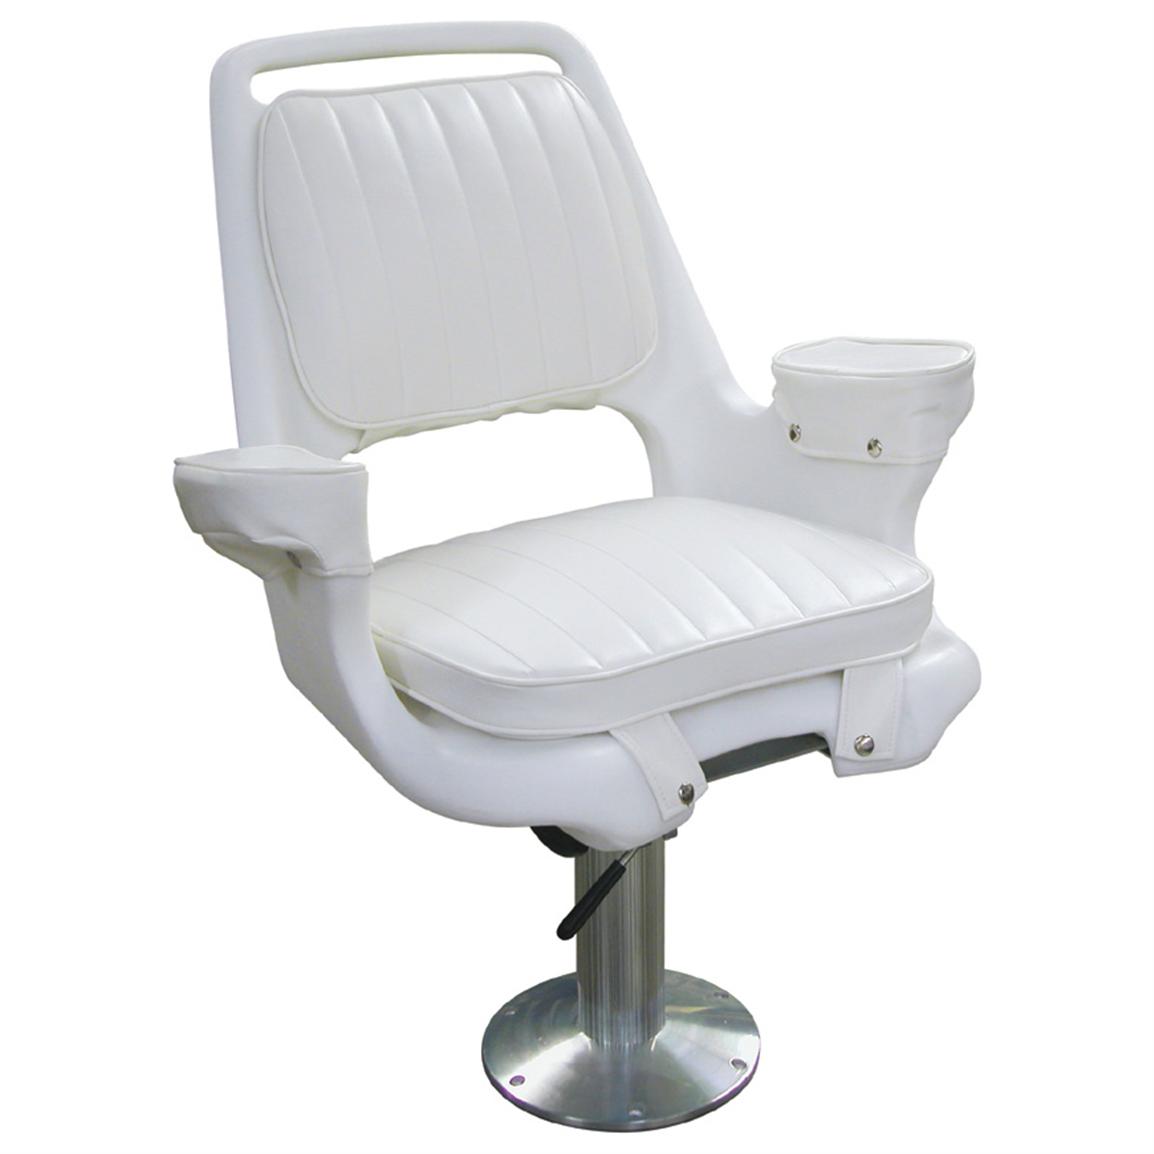 Wise® Offshore Extra Wide Captain's Chair with Pedestal, White